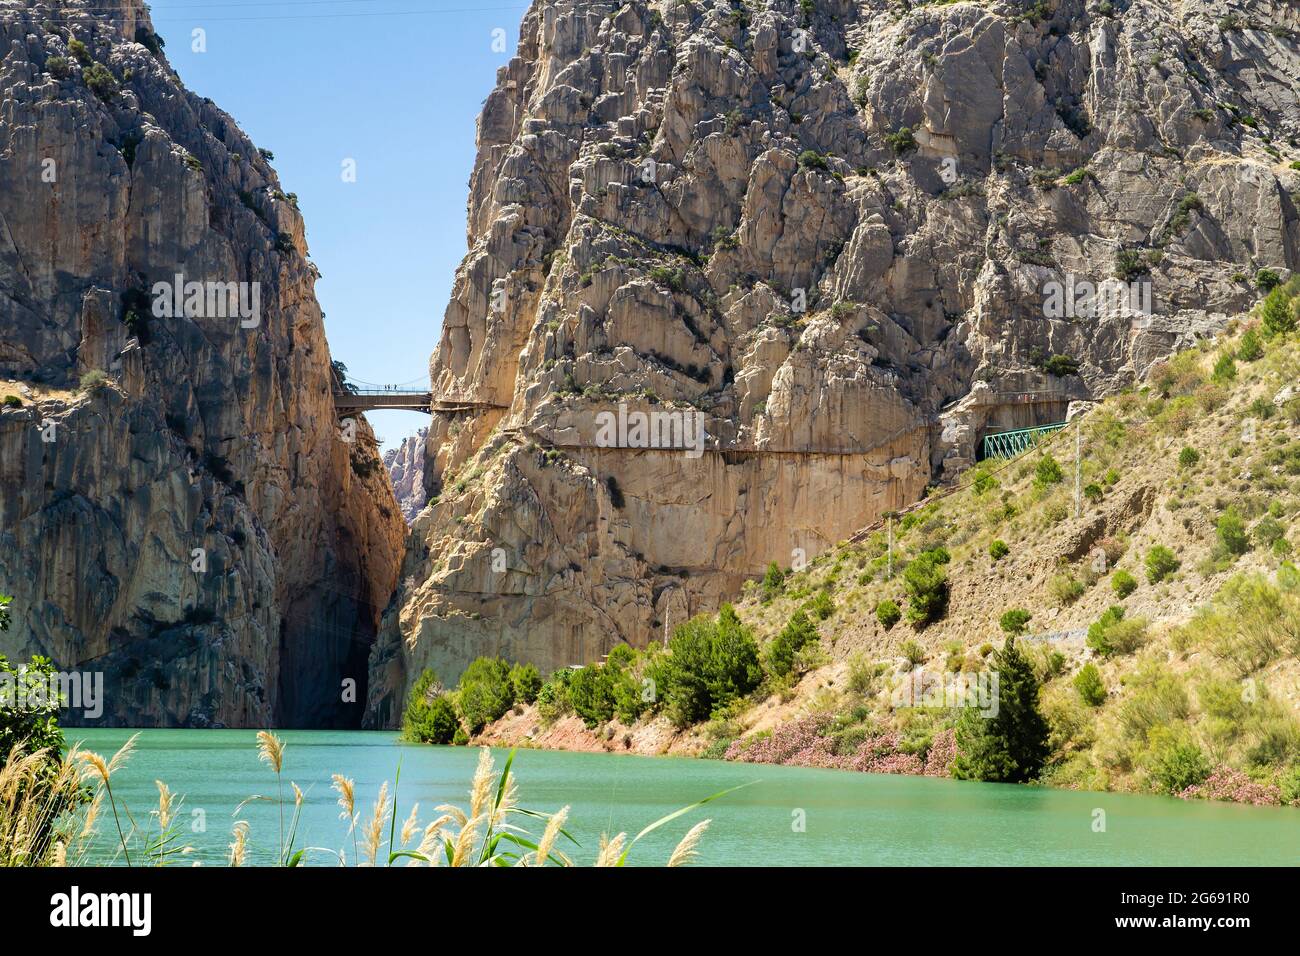 Caminito del Rey walkway in Gorge of the Gaitanes, Guadalhorce river canyon in Malaga, Spain Stock Photo